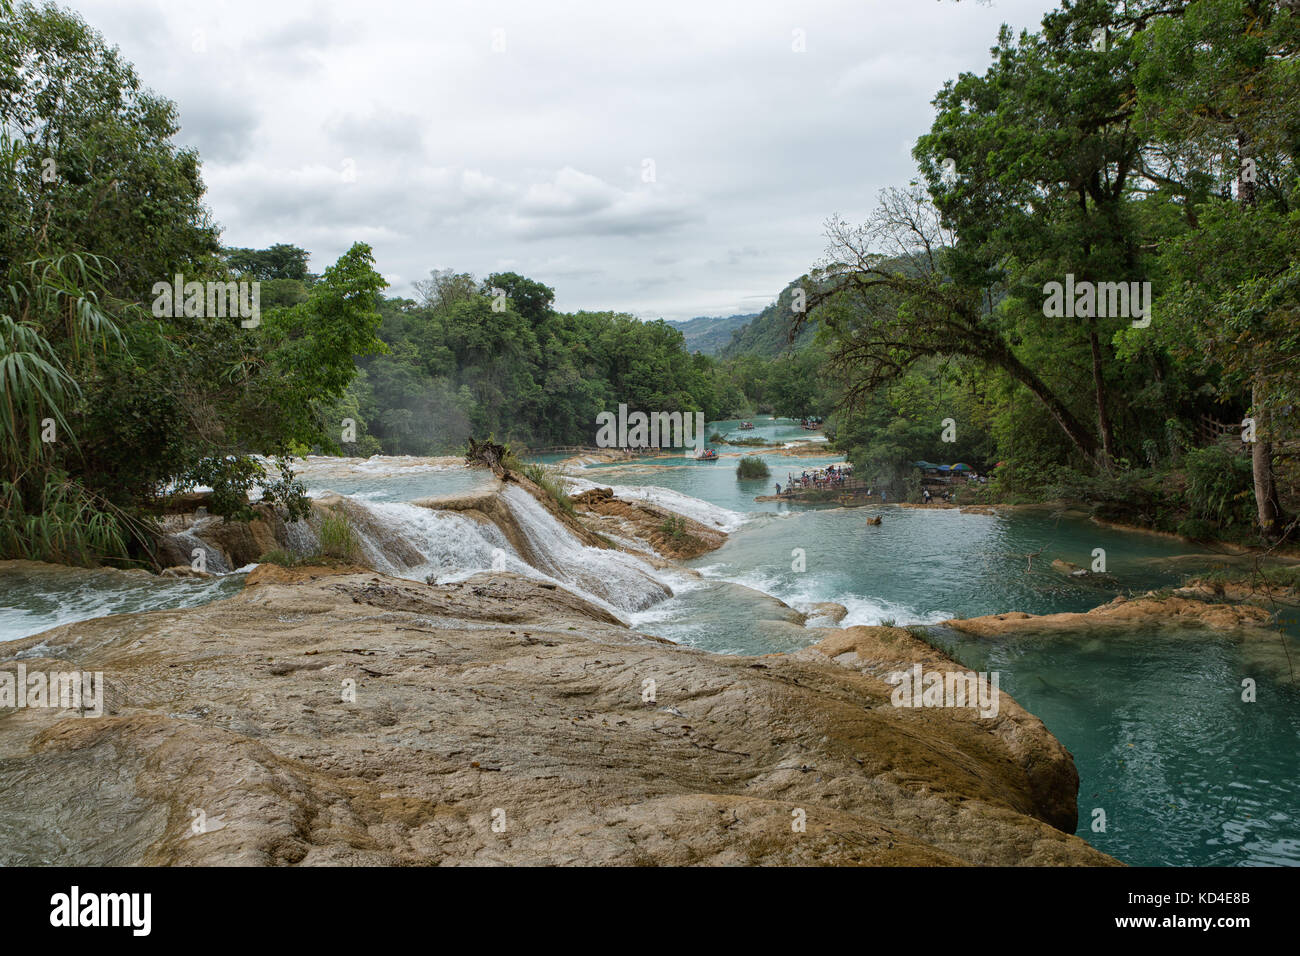 April 16, 2014 Tumbala, Mexico: the 'Agua Azul' waterfall  consists of many cataracts following one after another and is one of the main attractions o Stock Photo